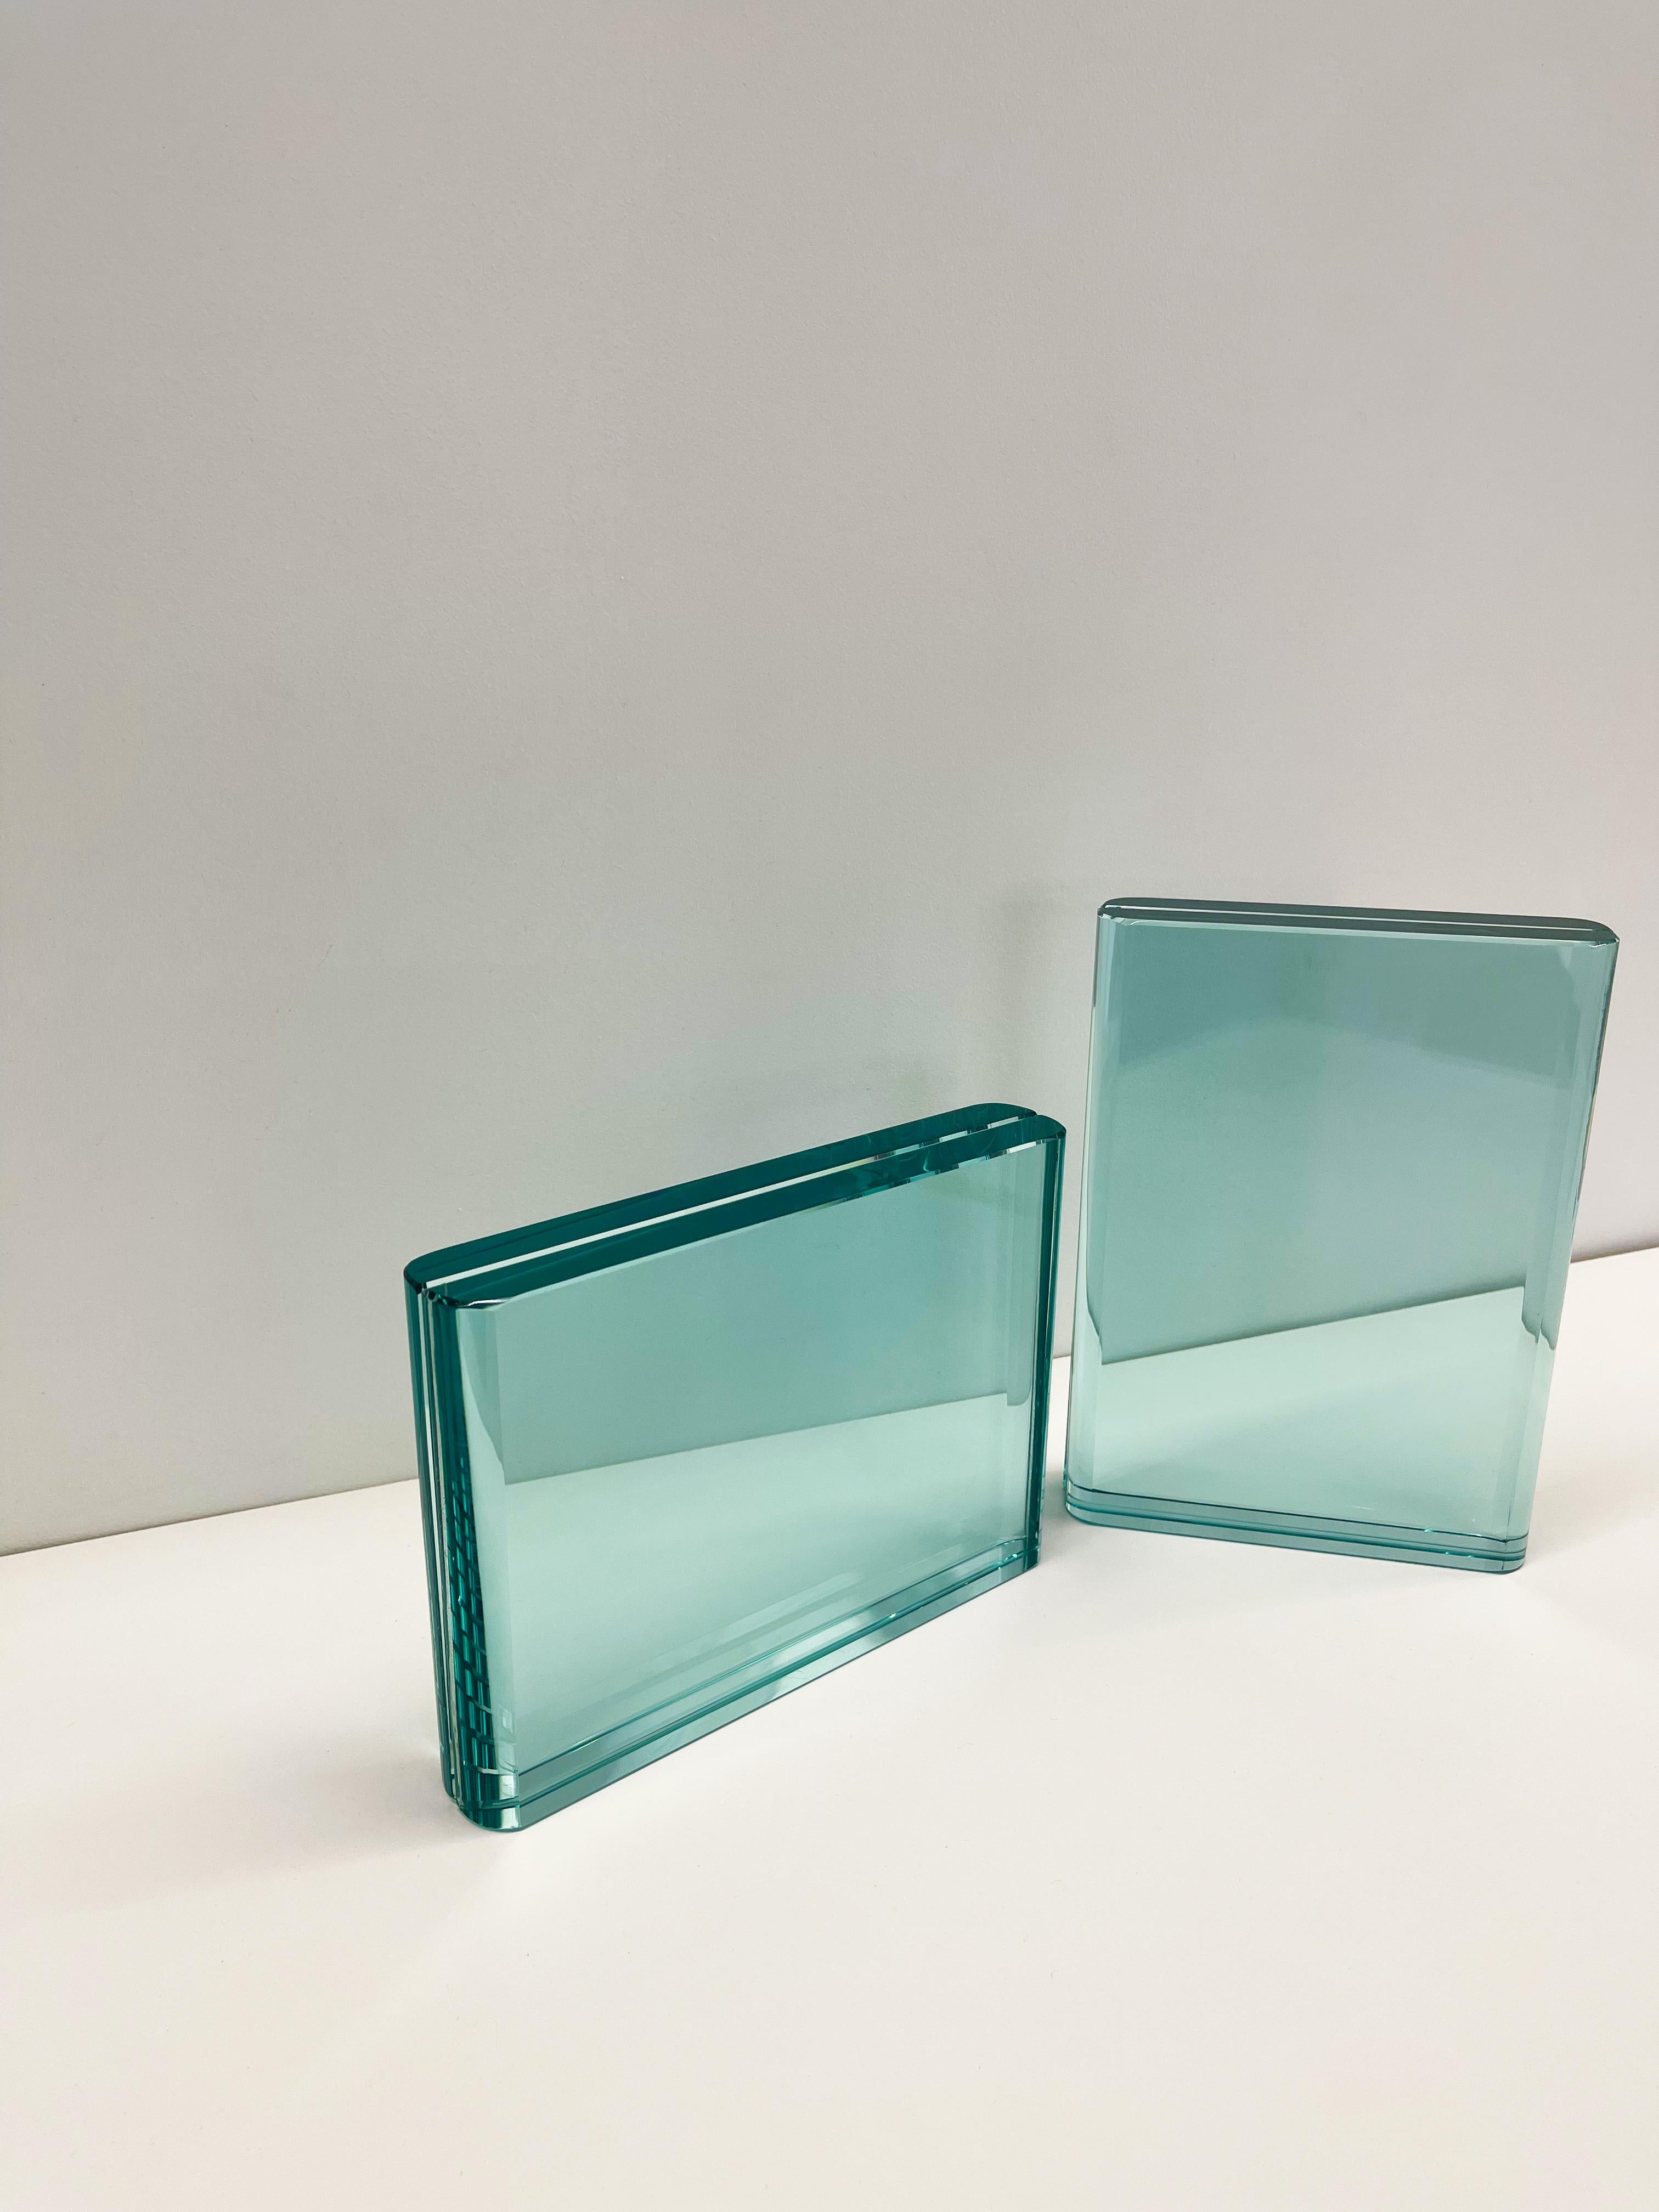 Glass Contemporary Set of Two Handmade Aquamarine Crystal Photo Frames by Ghirò Studio For Sale